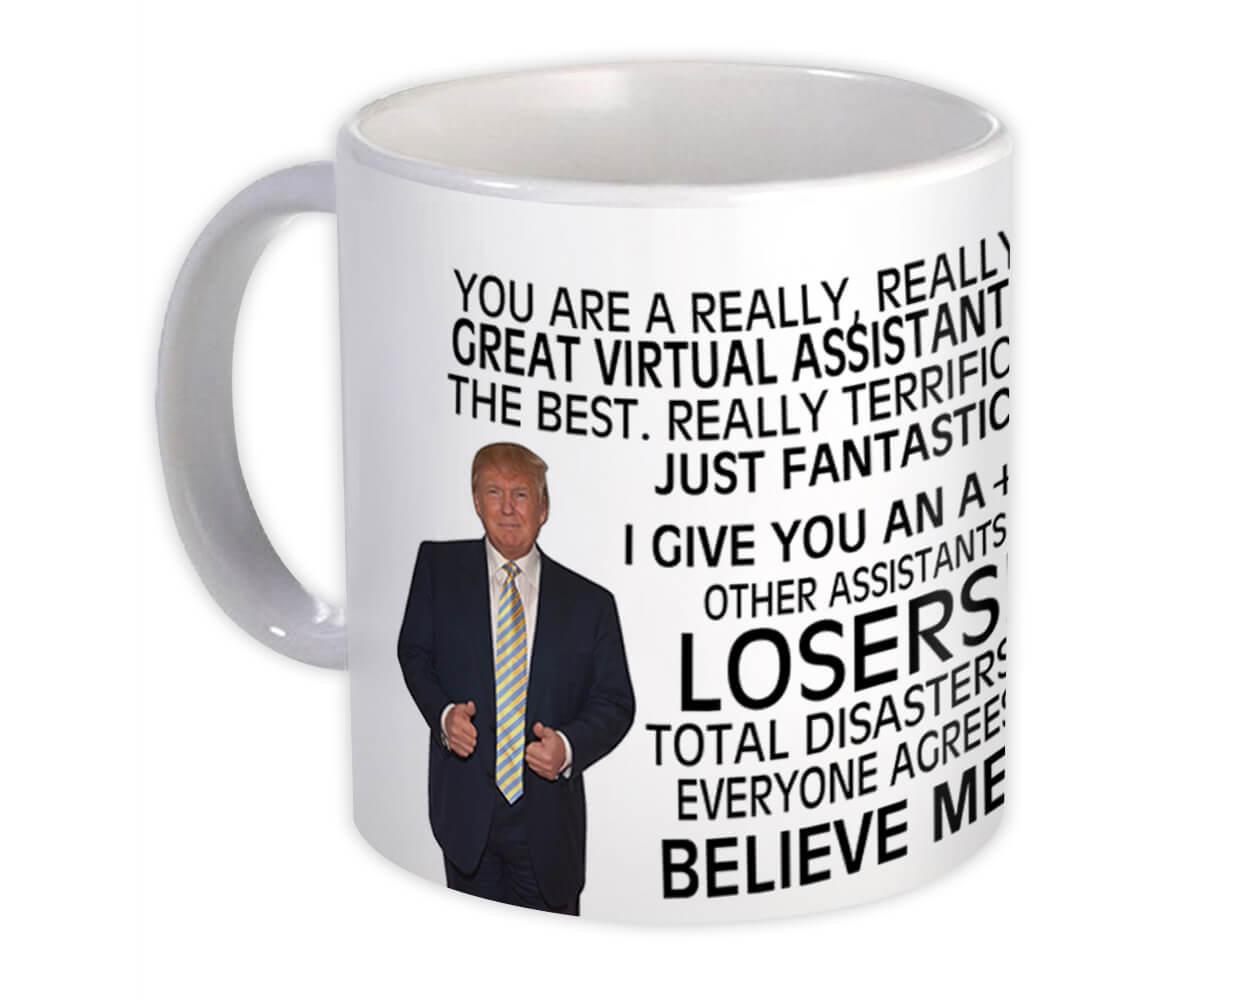 Details about   VIRTUAL ASSISTANT Gift Funny Trump Mug Best Birthday Christmas Jobs 